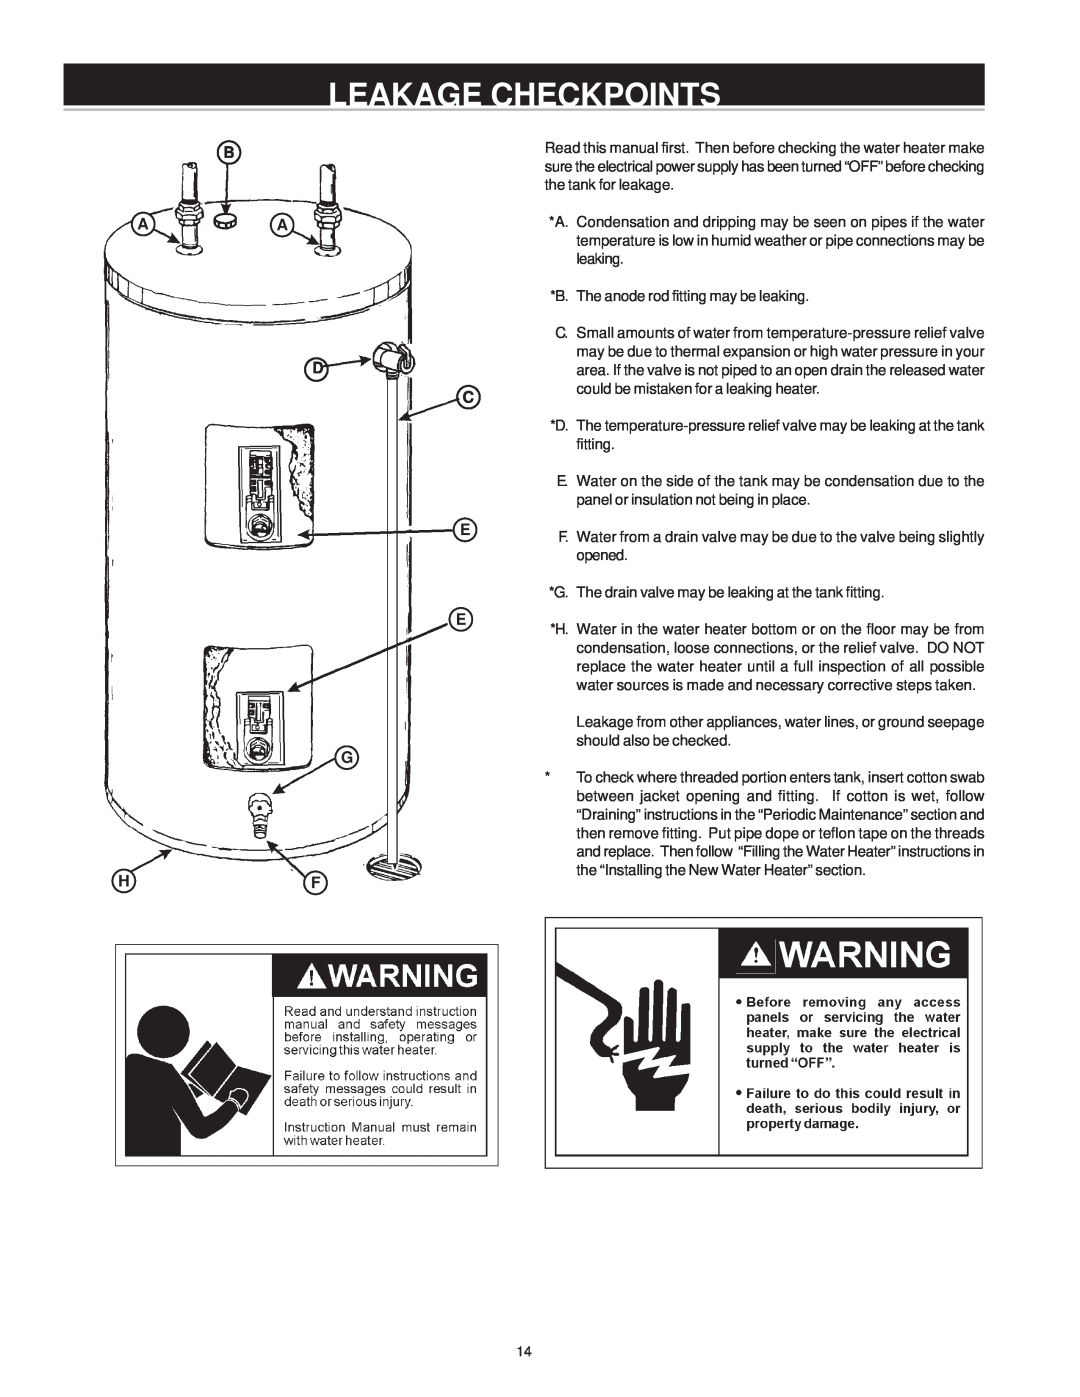 A.O. Smith WATER HEATERS instruction manual Leakage Checkpoints 